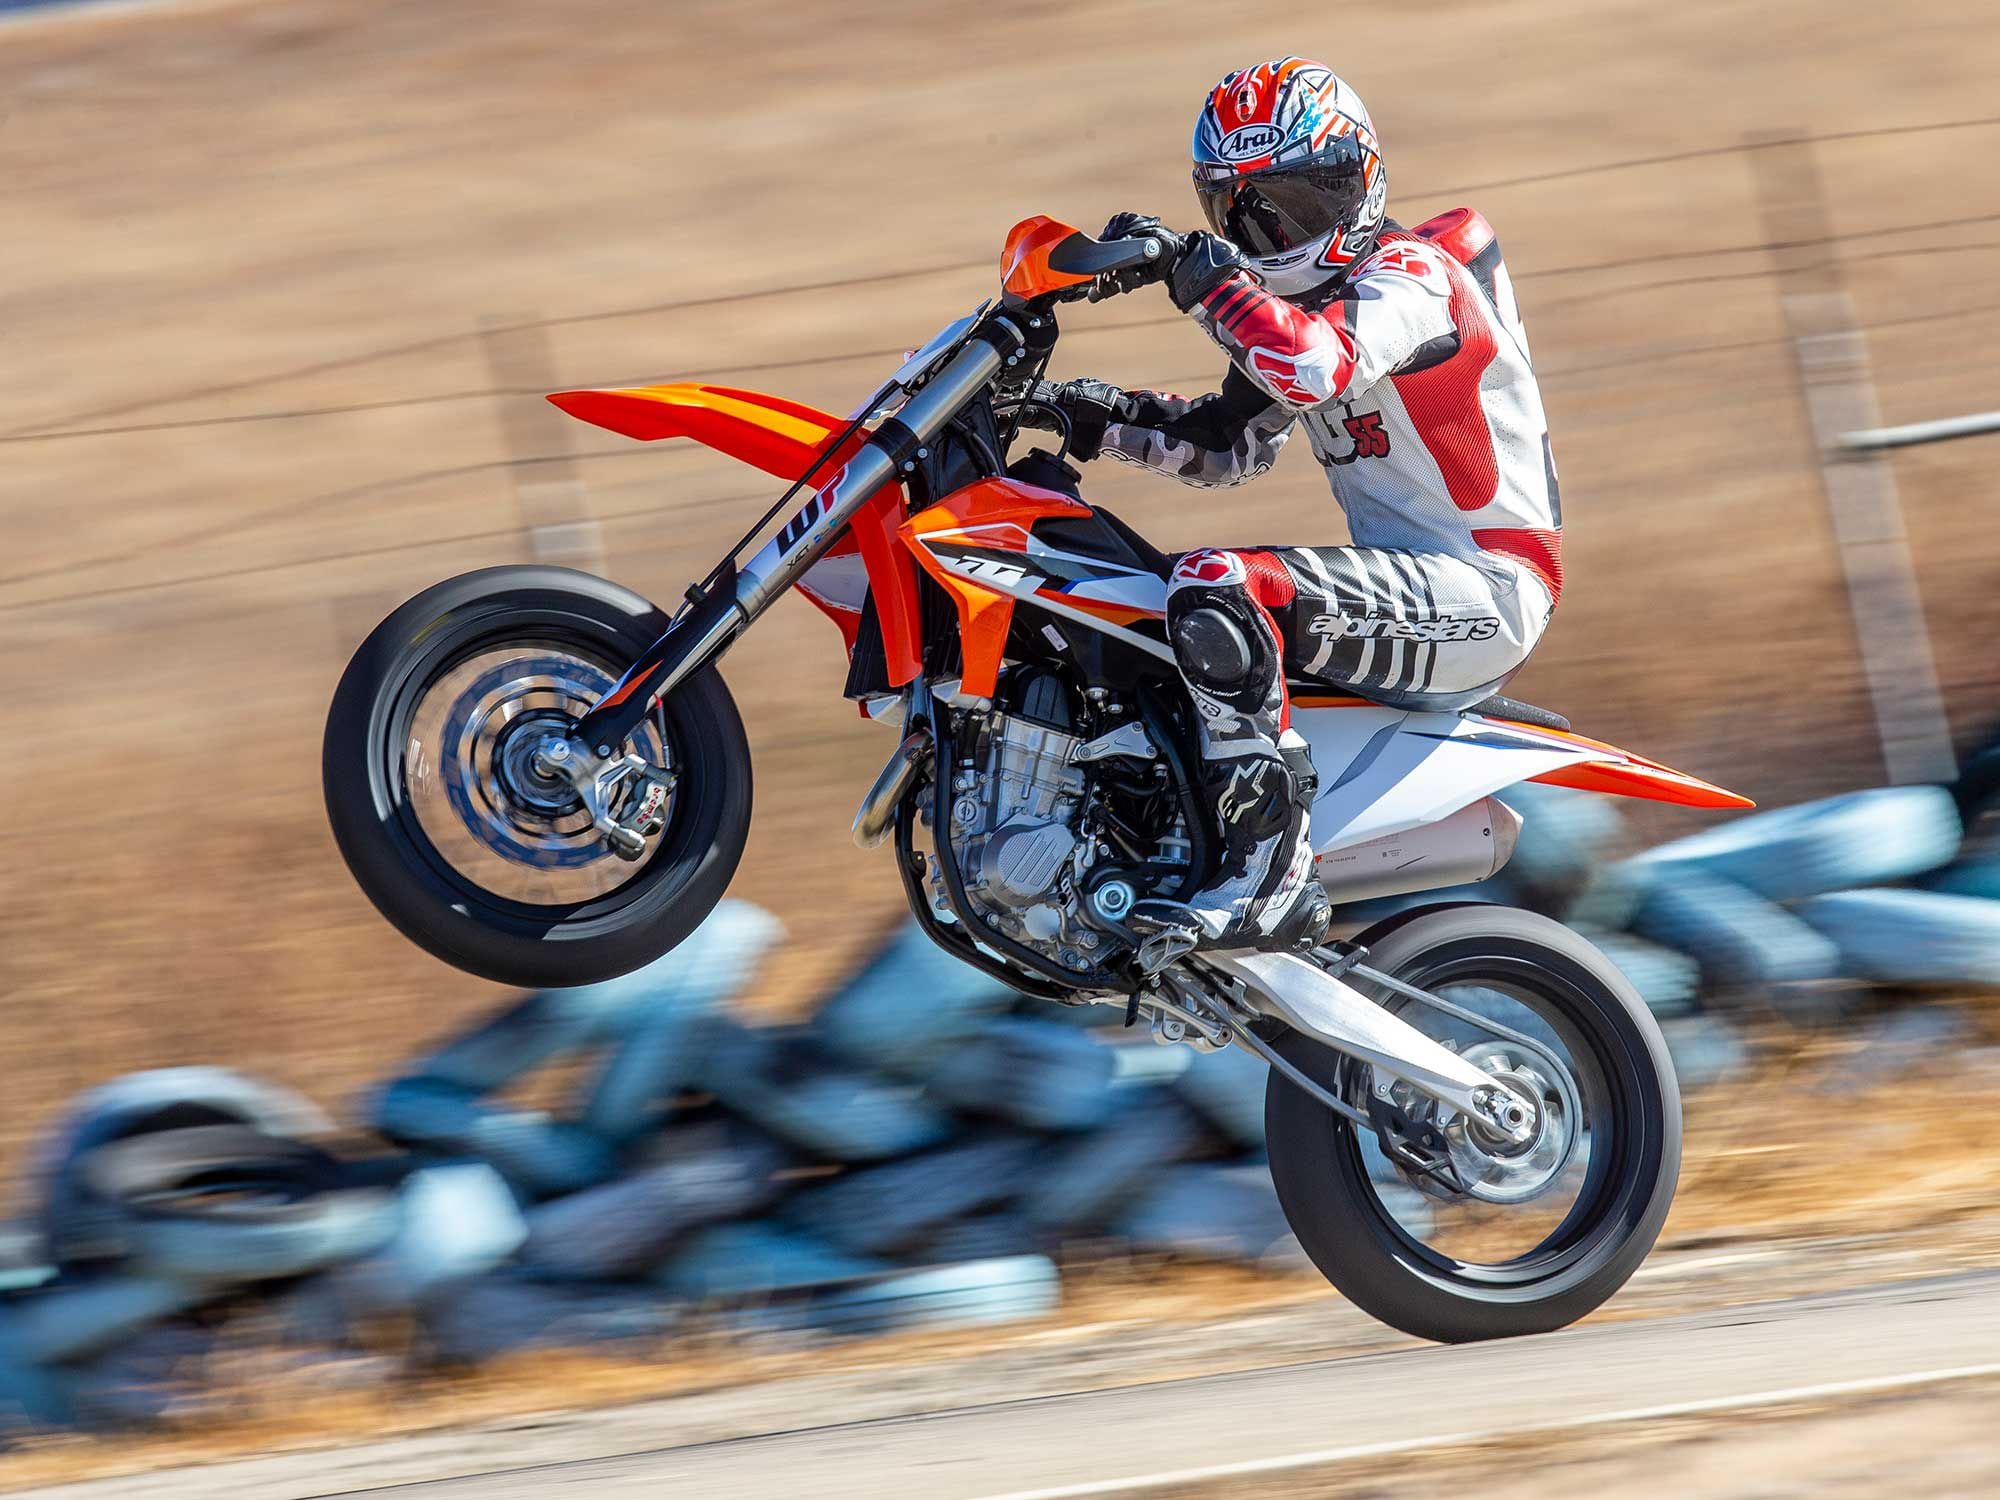 The 2021 KTM 450 SMR packs a punch of entertainment, value, and attainability that supermoto has struggled to achieve in the past, but might just spark a craze once more.